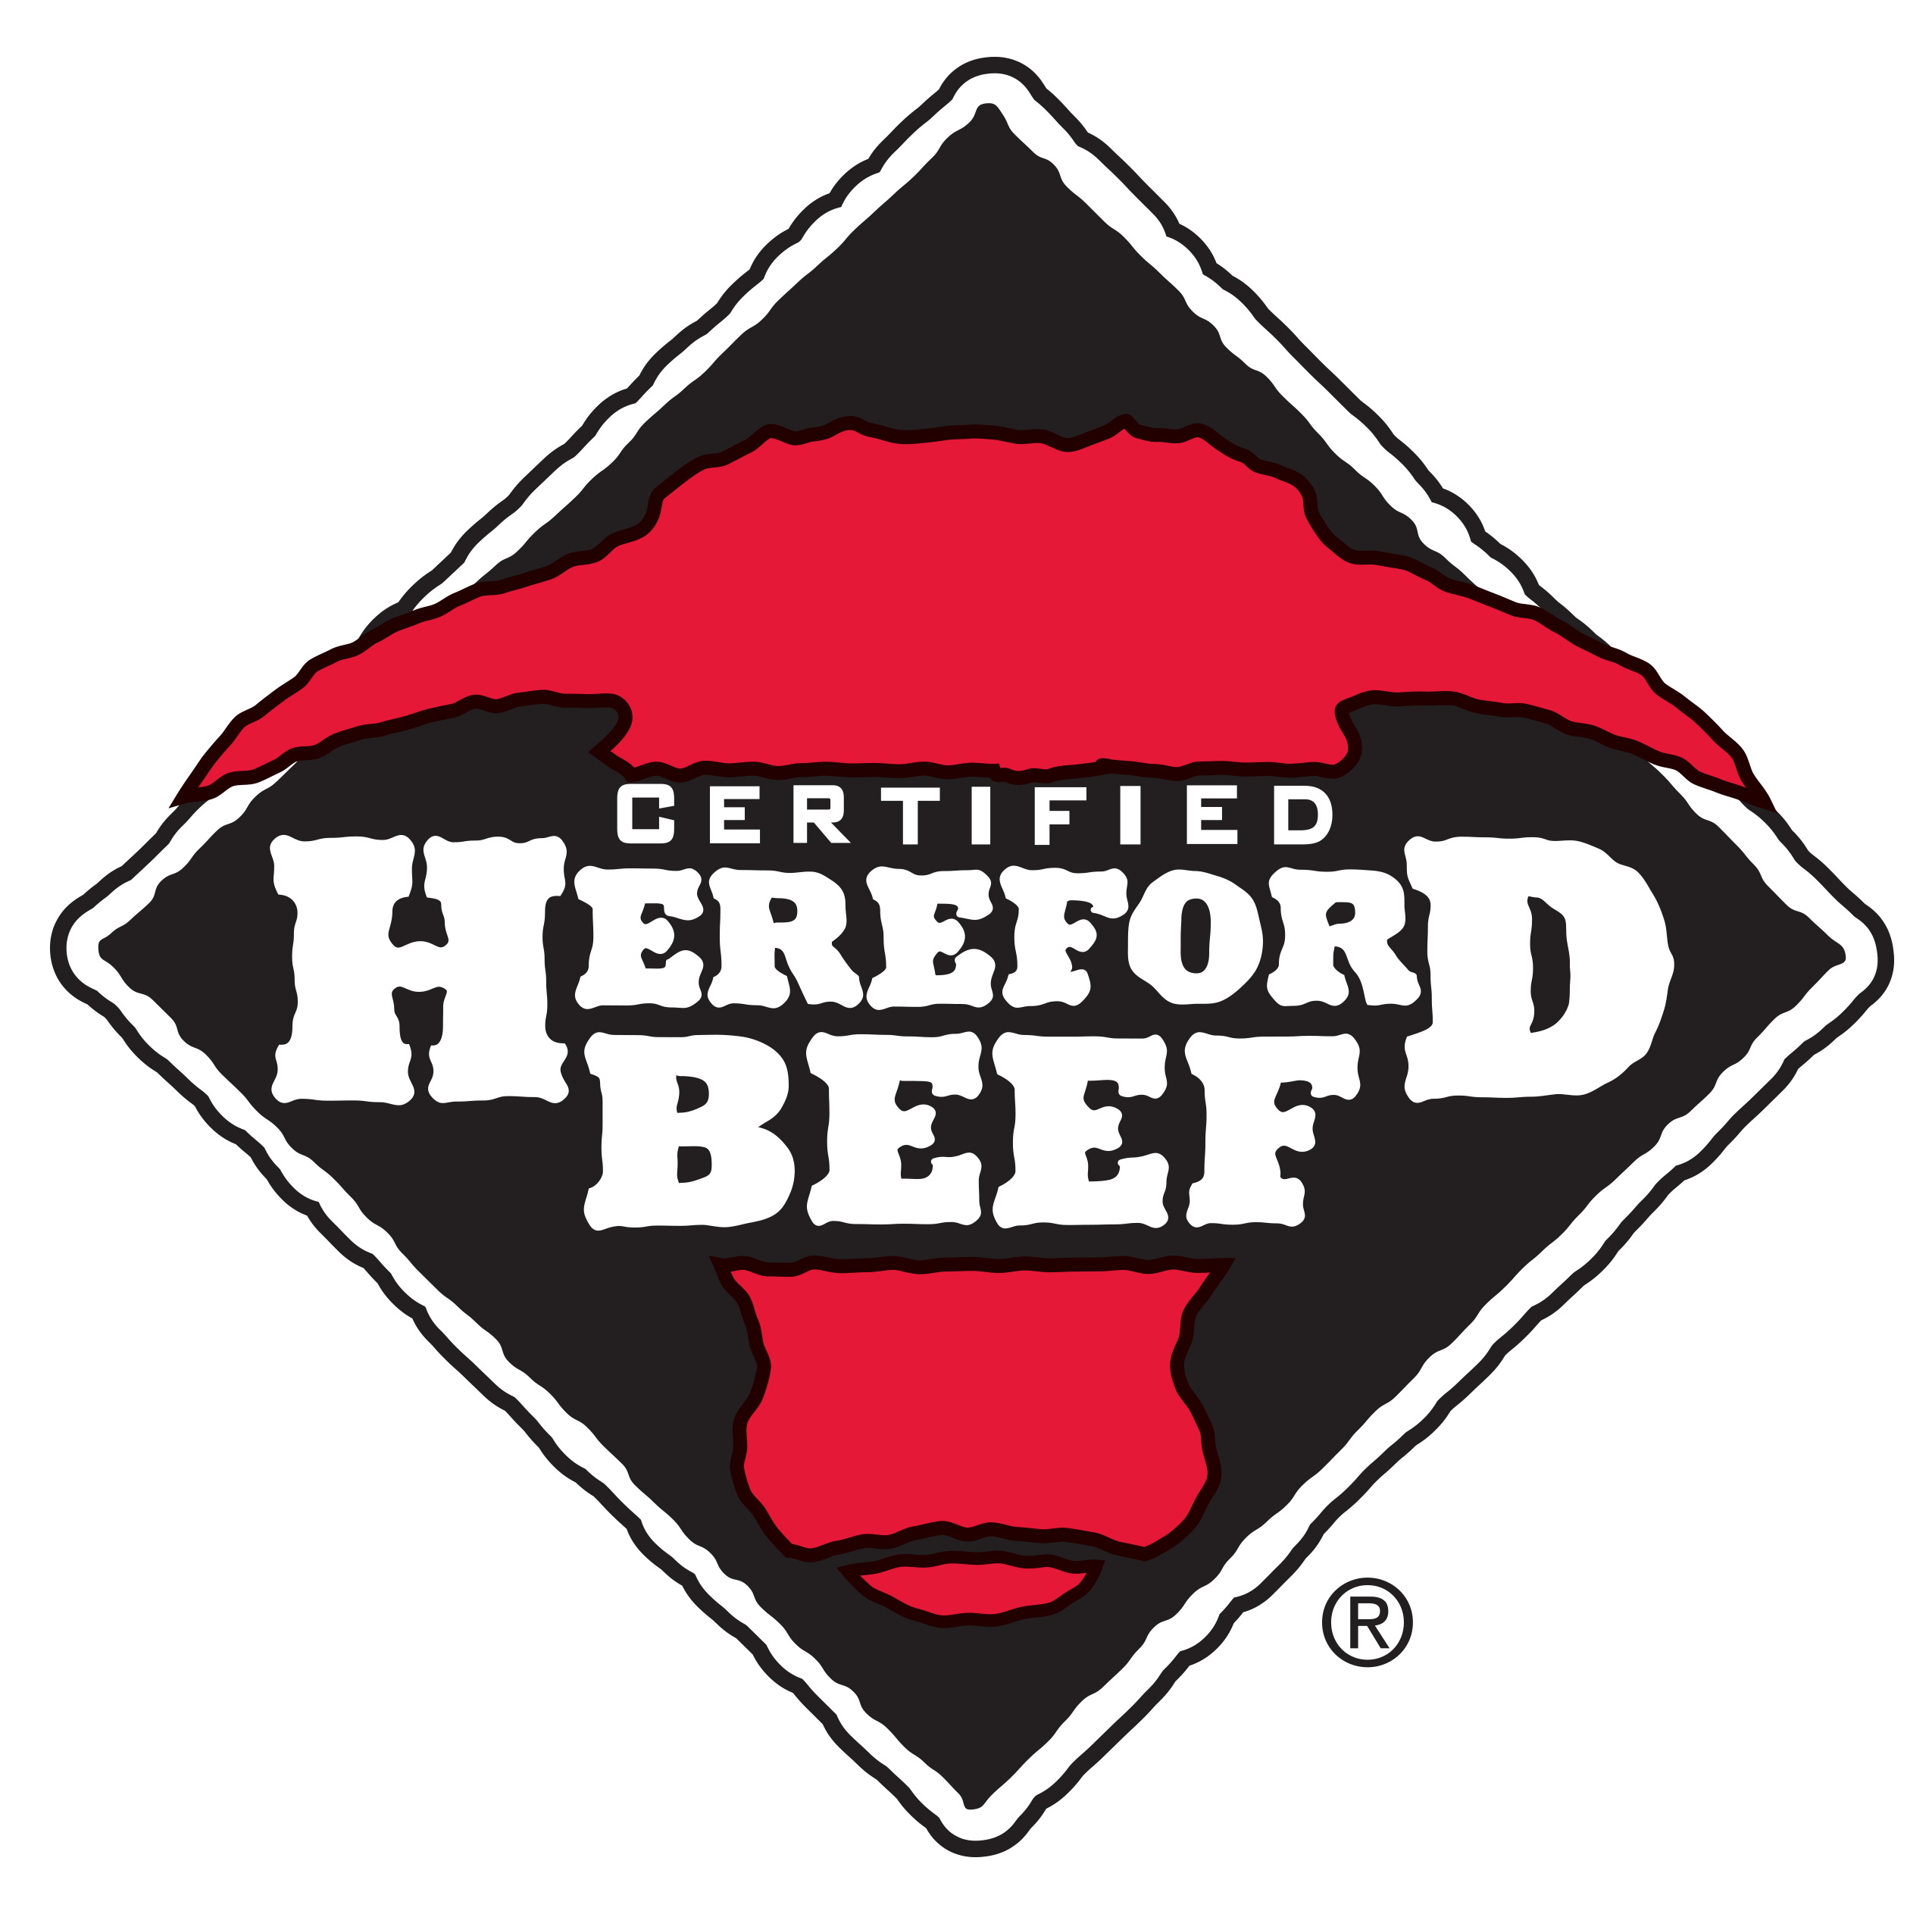 Certified Hereford Beef Set to Exhibit at the National Grocers Association Show Next Week